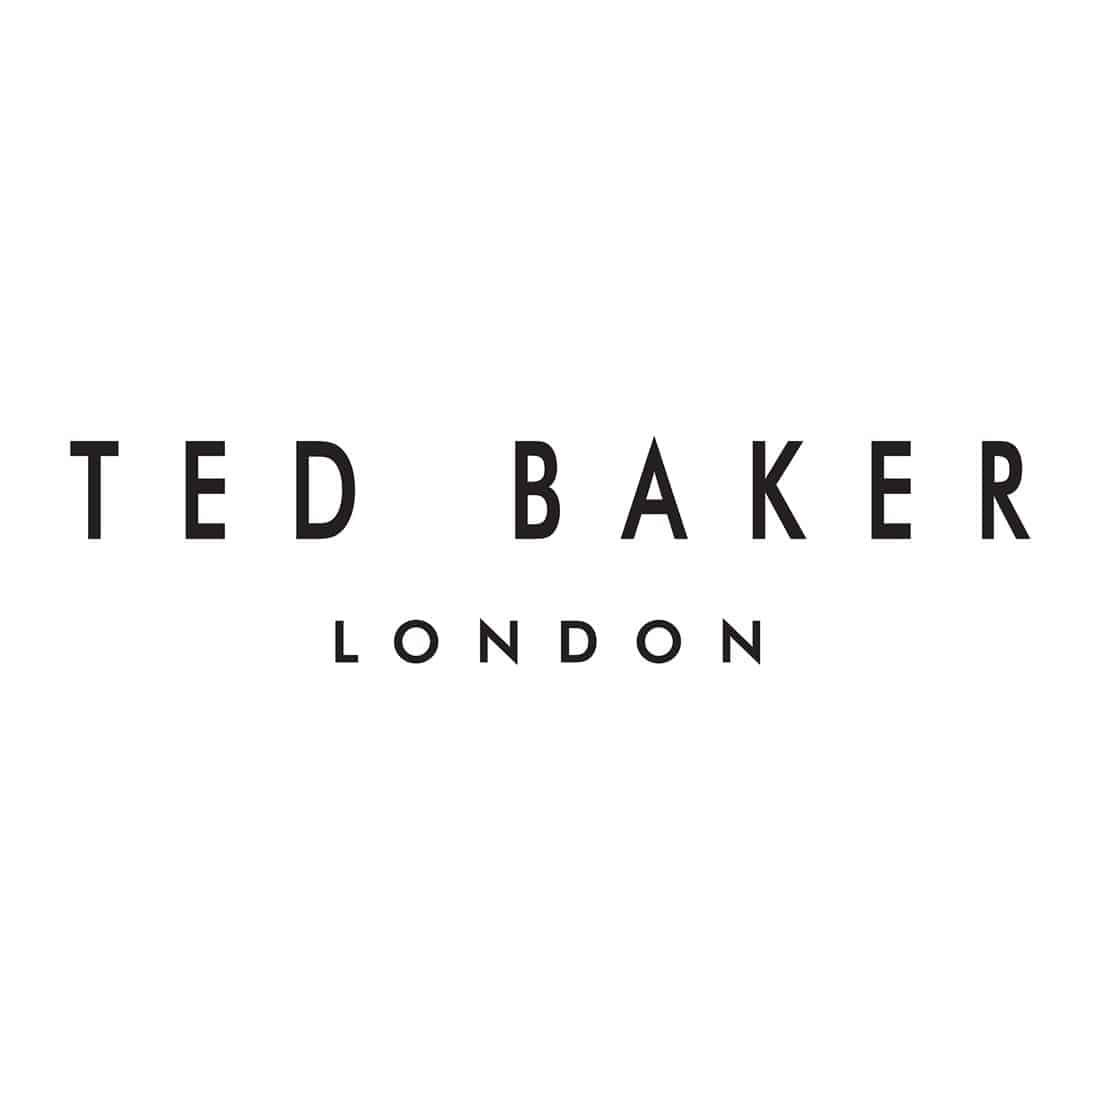 Ted Baker buys back footwear rights